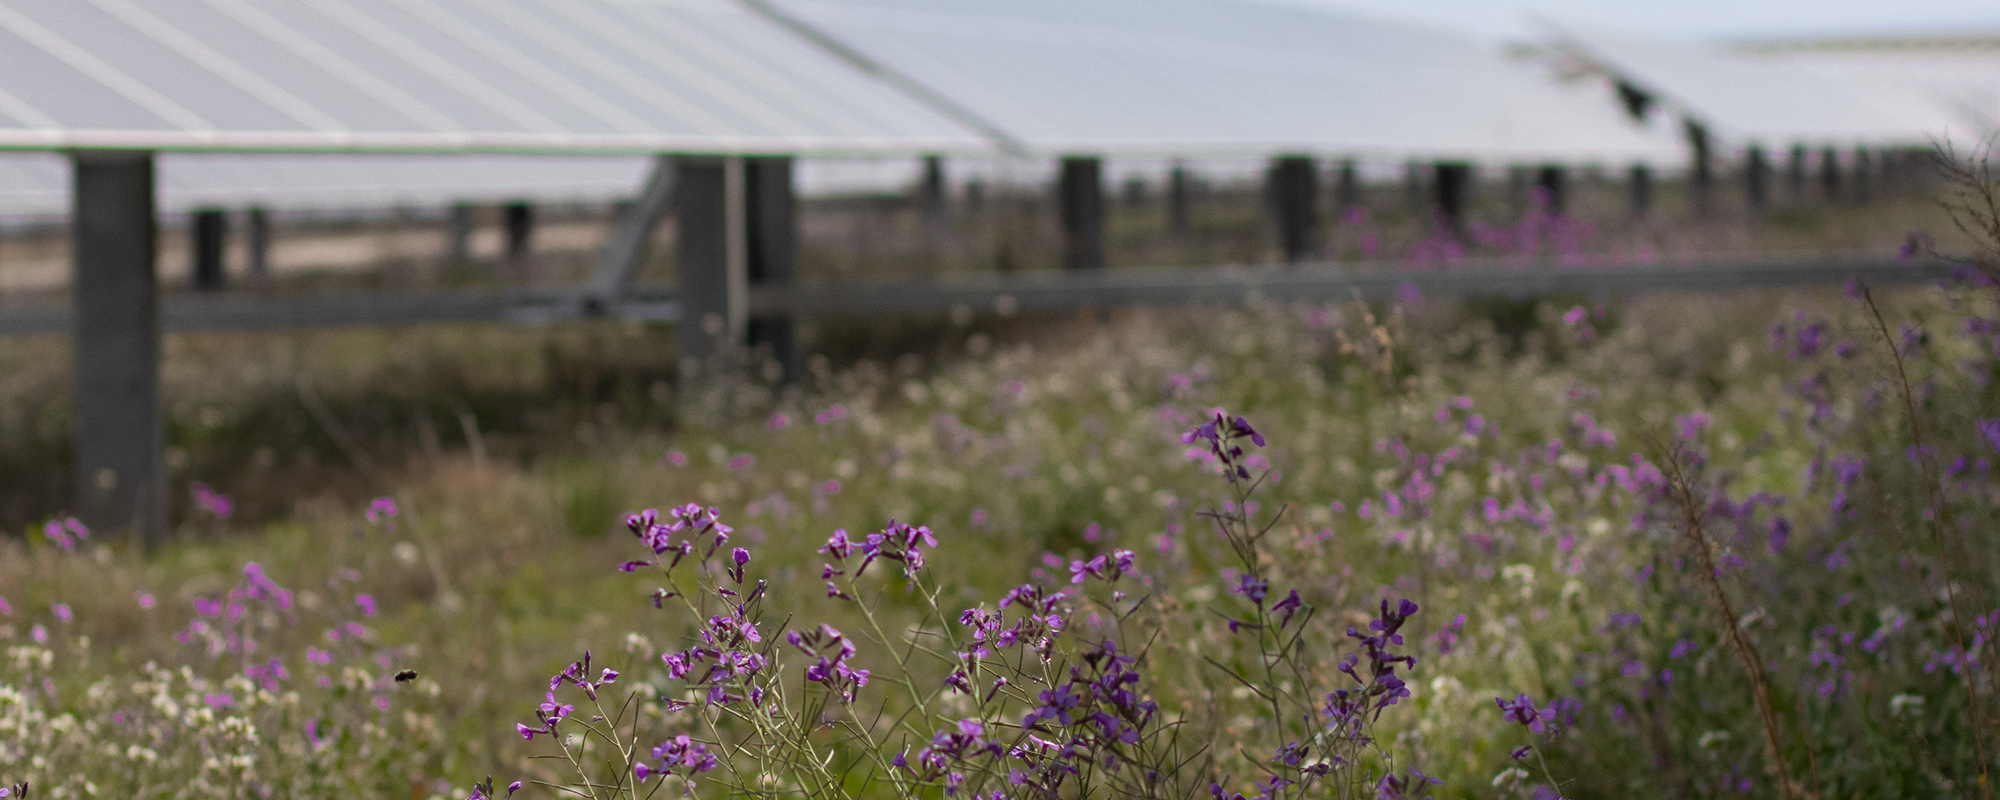 Purple flowers in front of solar panels